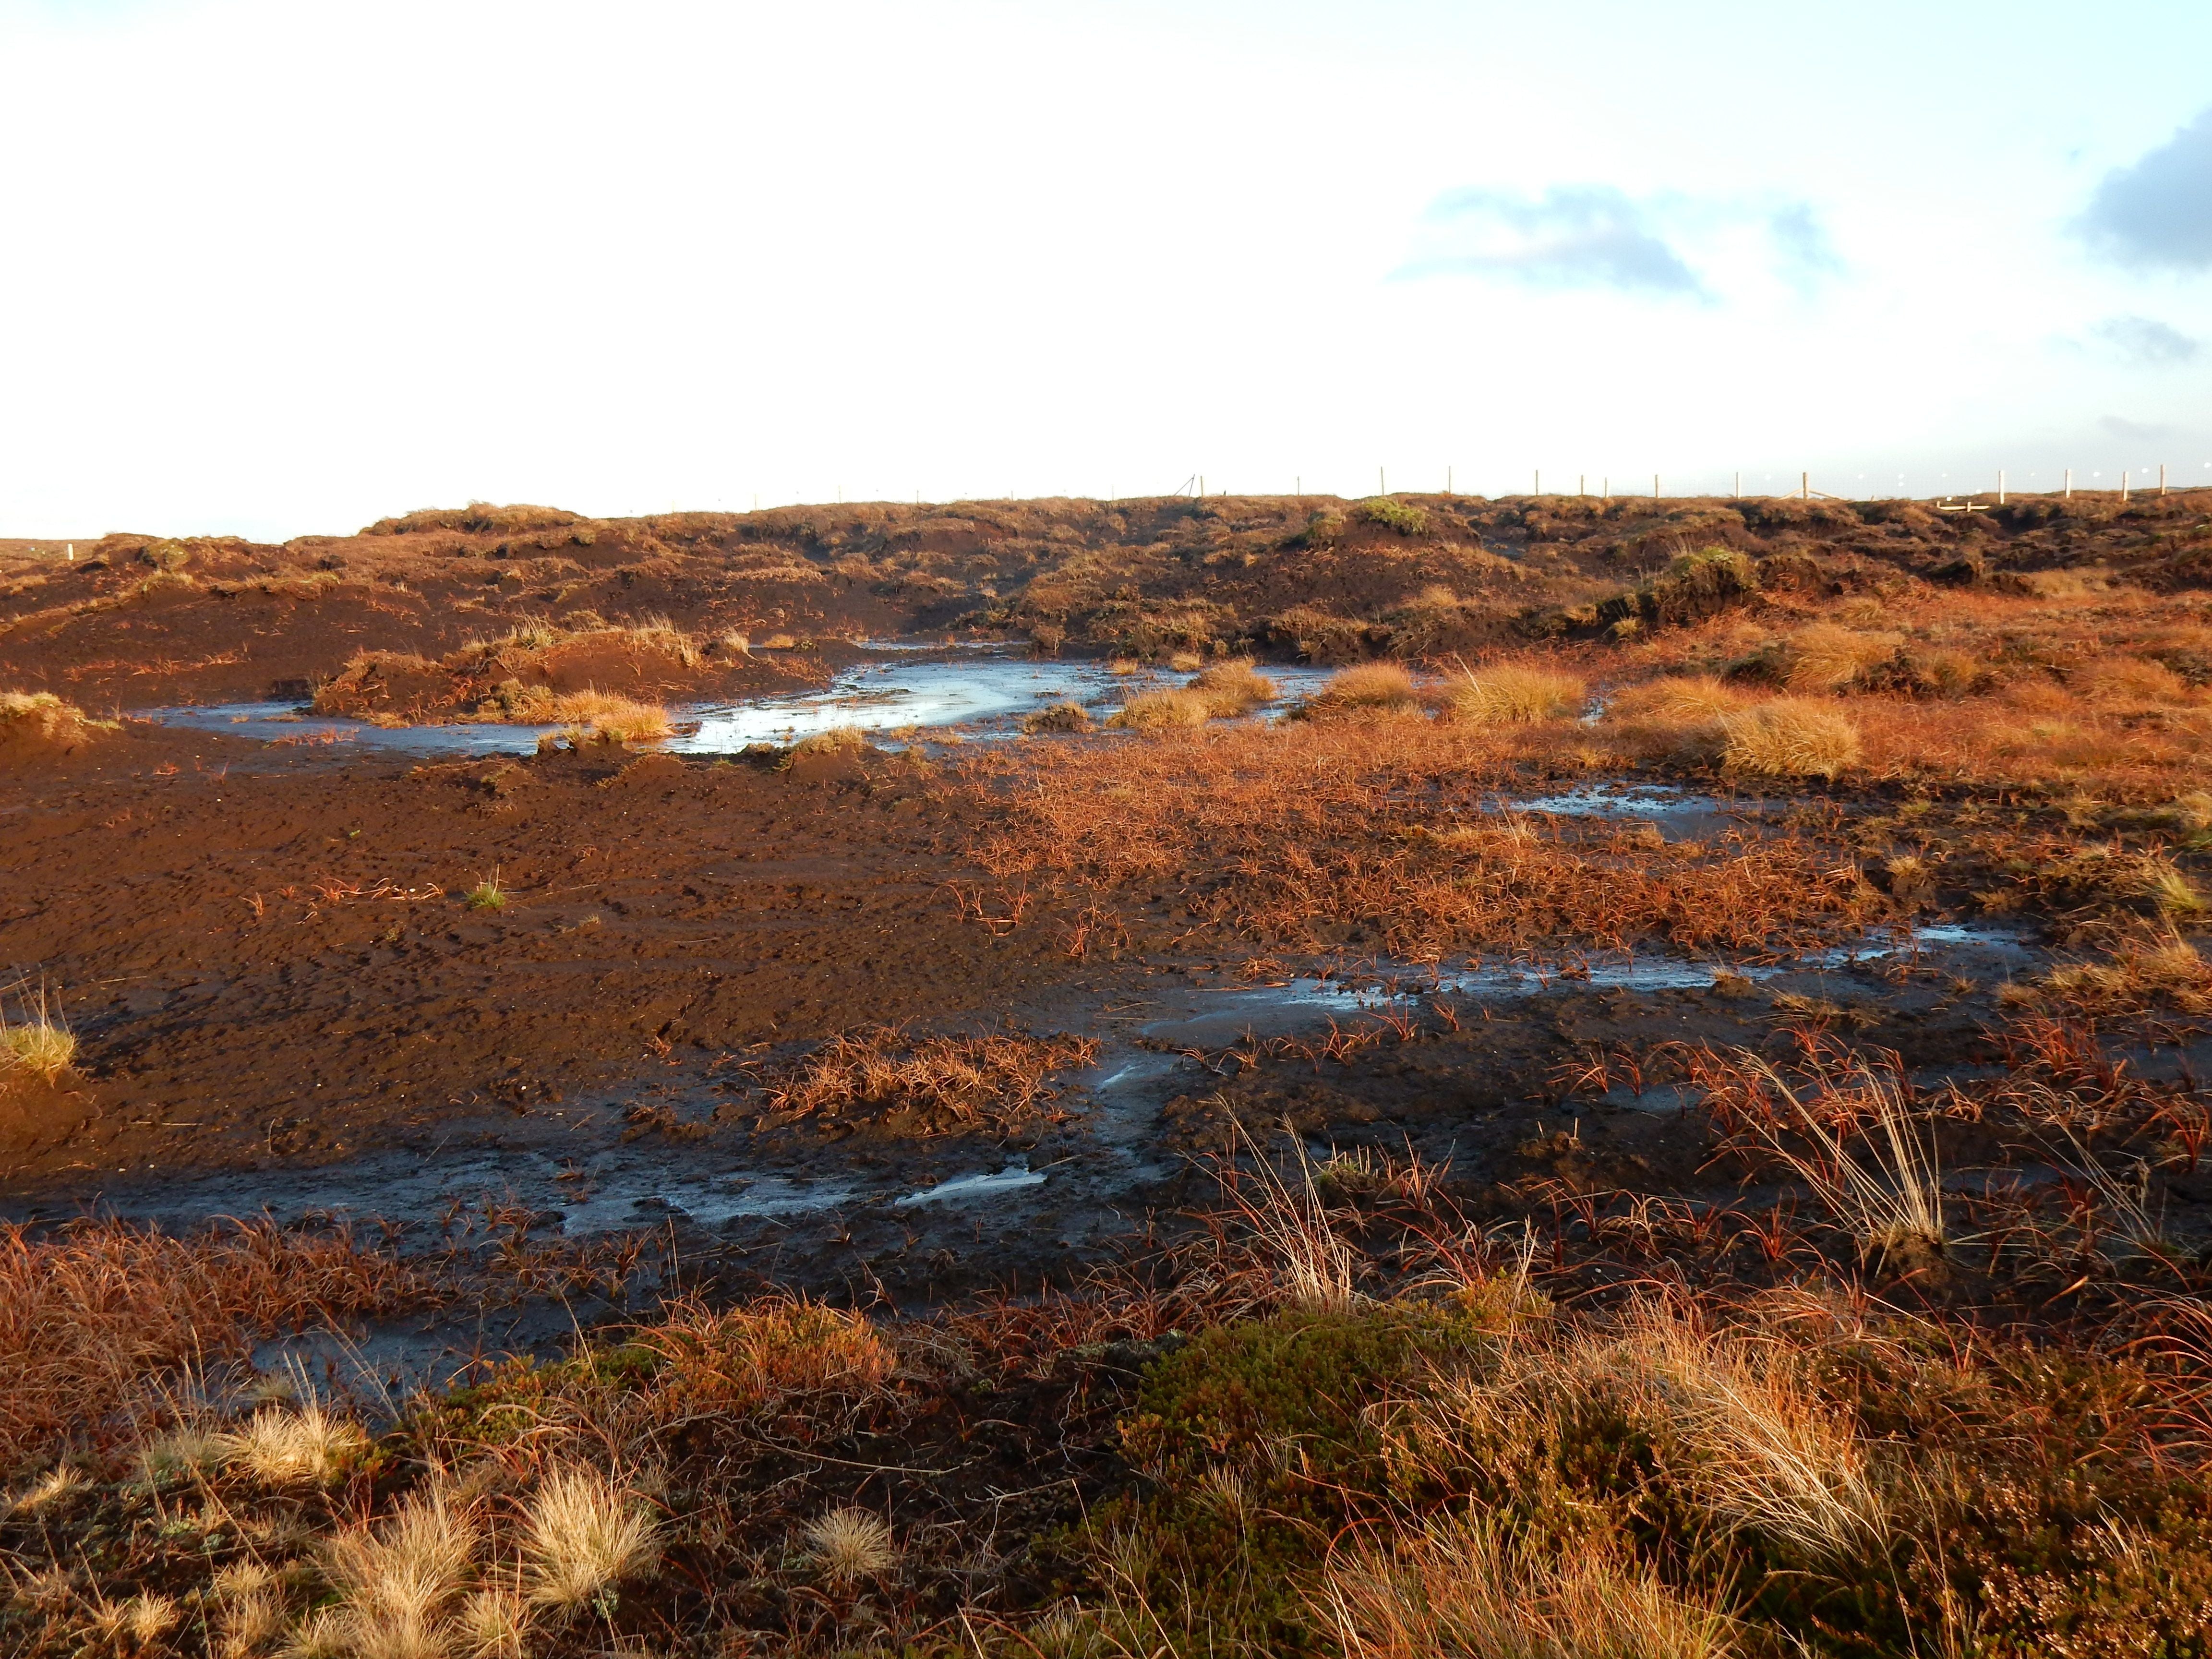 A degraded peatland in Yorkshire